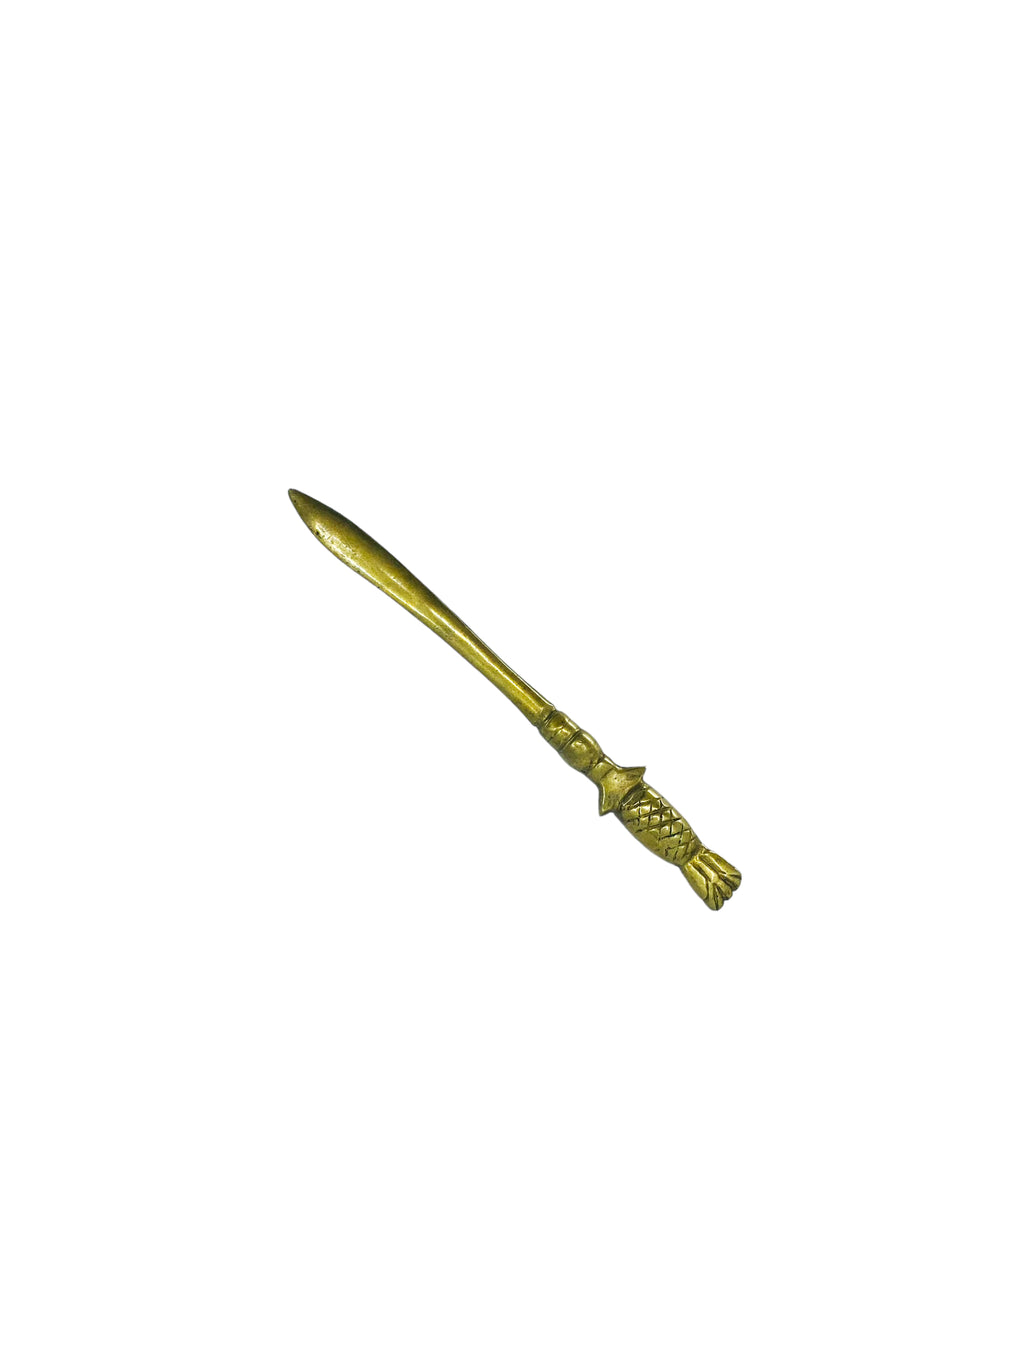 Solid Brass Pineapple Handle Letter Opener